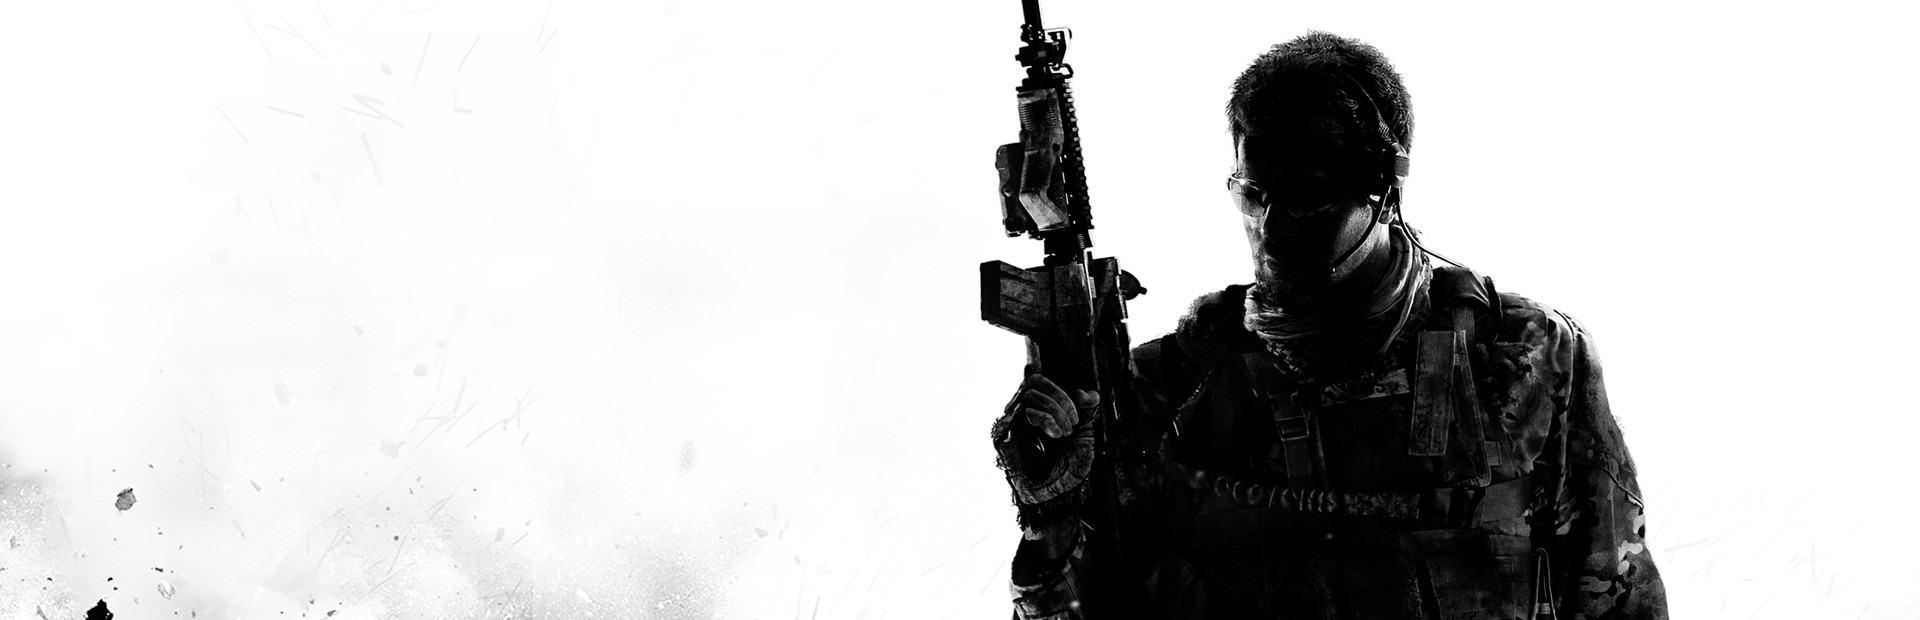 Banner Call of Duty: Modern Warfare 3 Collection 3 - Chaos Pack